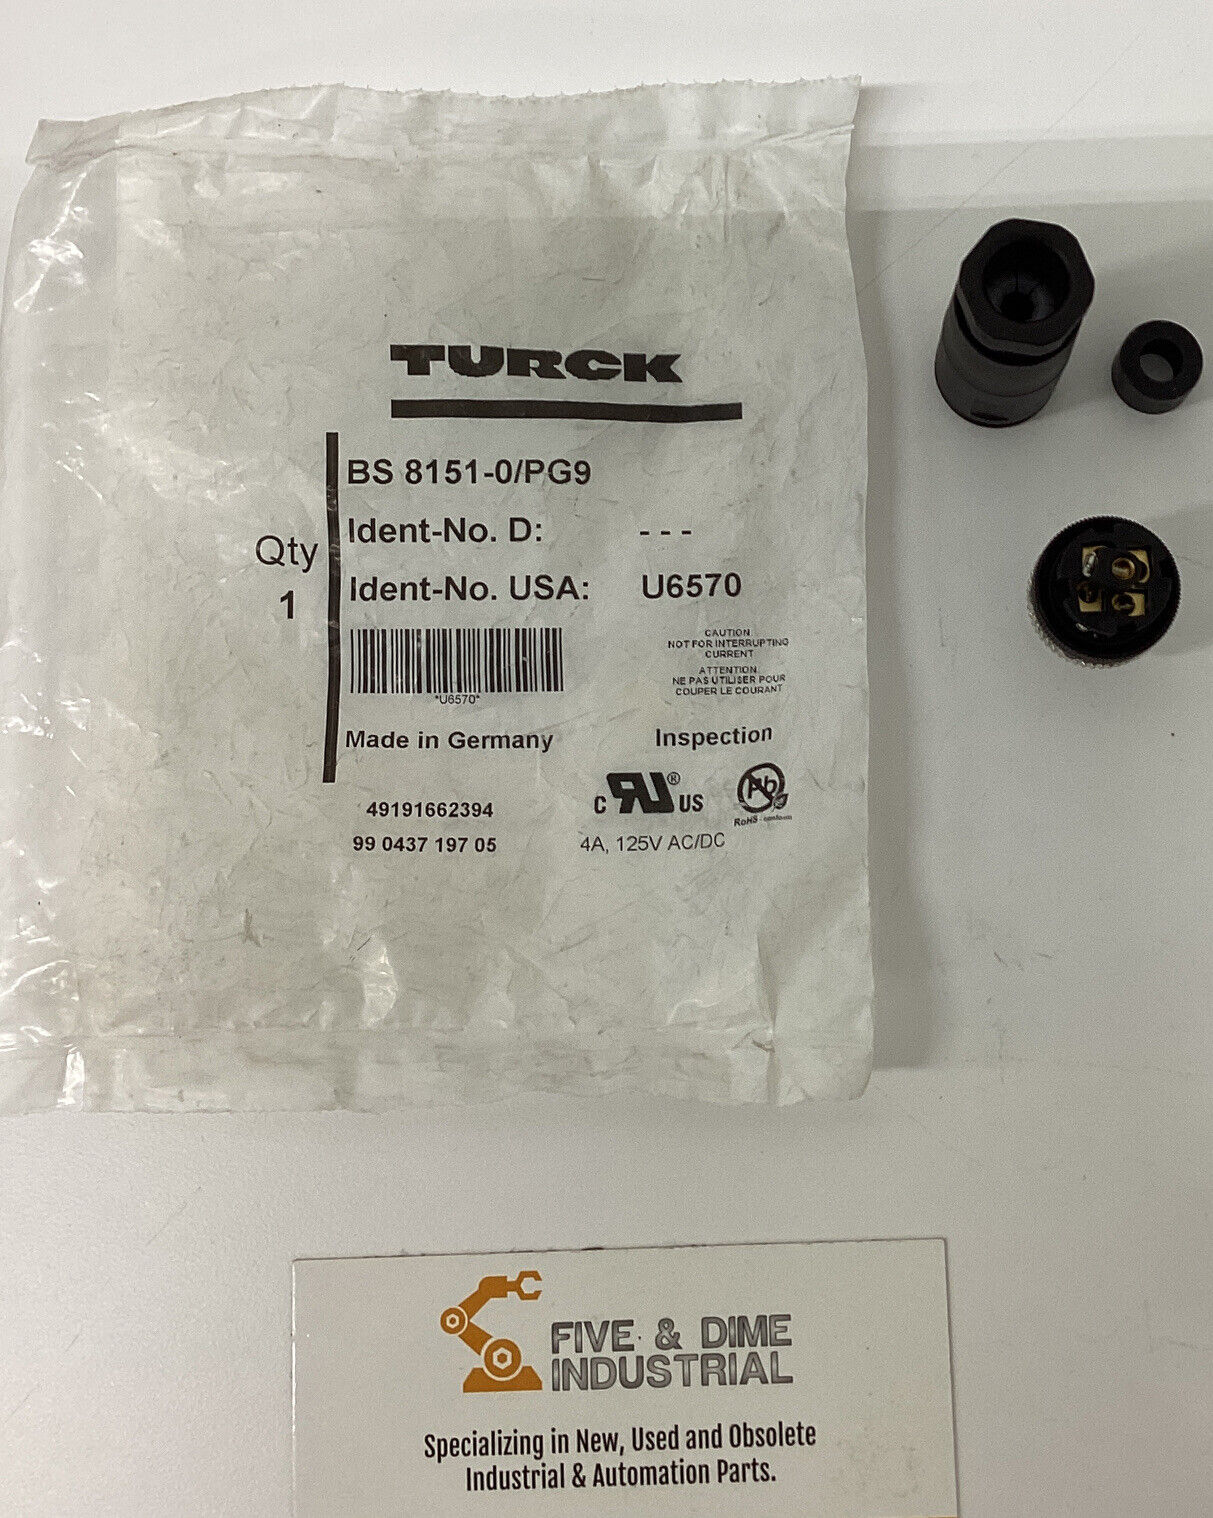 Turck BS 8151-0/PG9  5-Pin Straight M12 field connector (CL266)